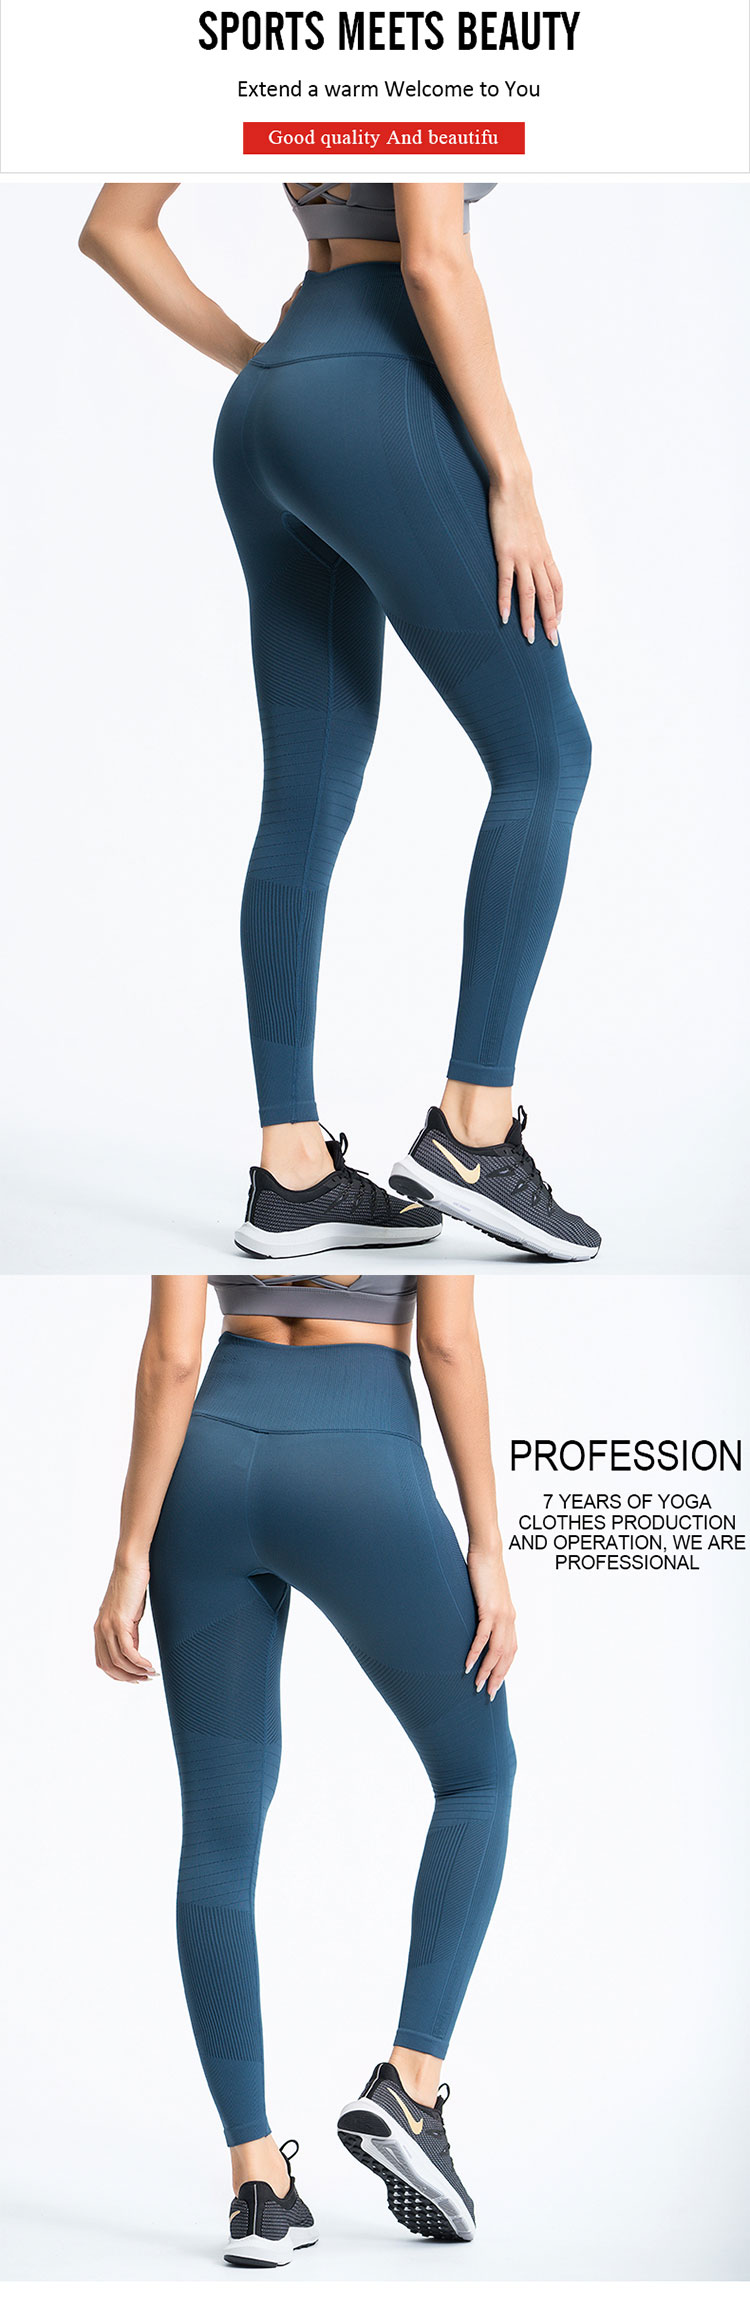 Design-of-seamless-yoga-leggings,-actually-some-time-we-don't-need-to-pursue-the-material-we